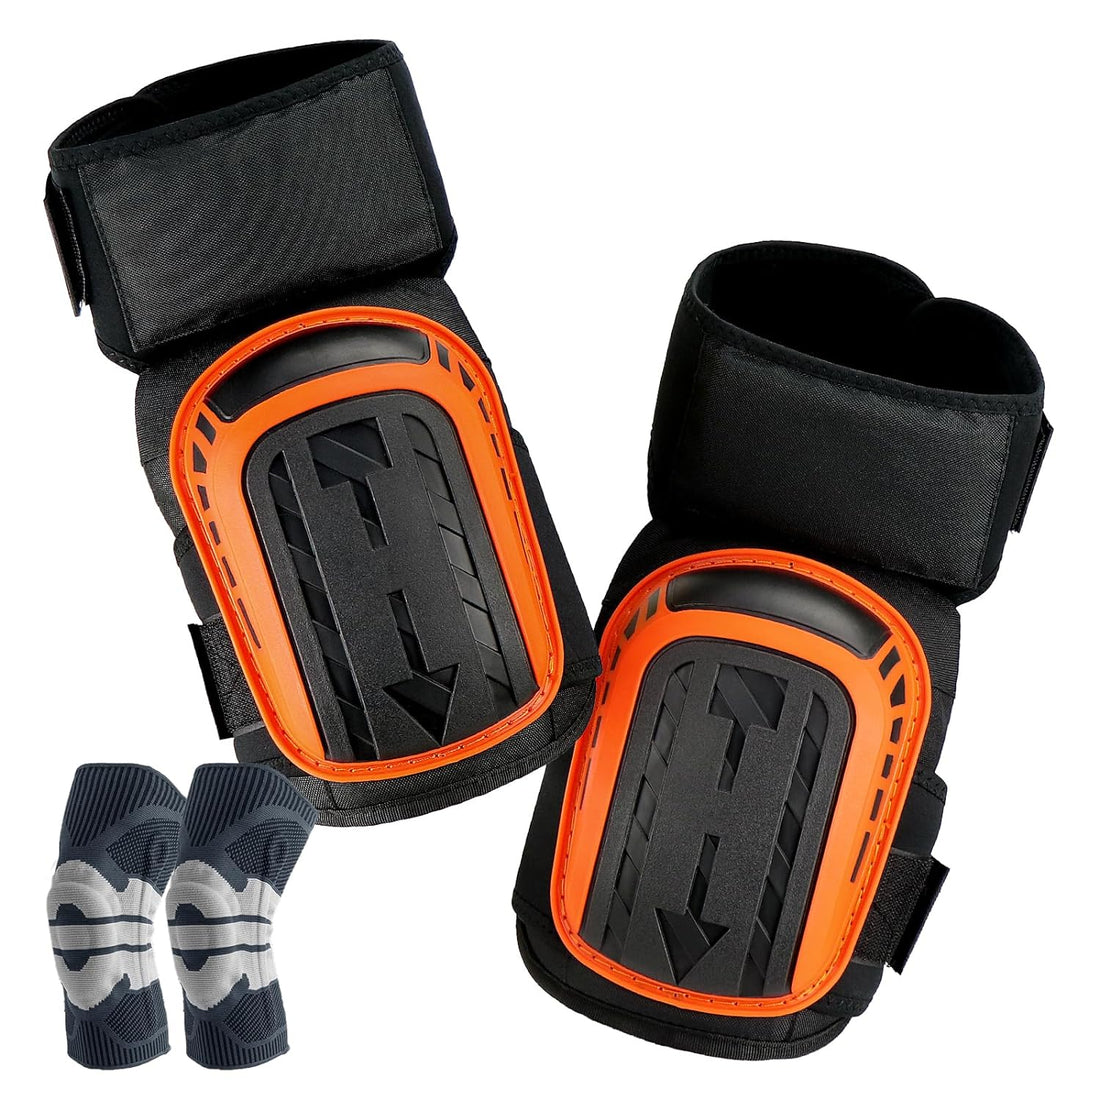 FTUREERA Knee Pads Set For Work, Heavy Duty Anti-Slip Cap,Construction Gel Knee Pads Tools,Compression Knee Sleeve With Patella Gel Pad & Side Stabilizers，Knee Pads Can Be Used Alone Or In Combination